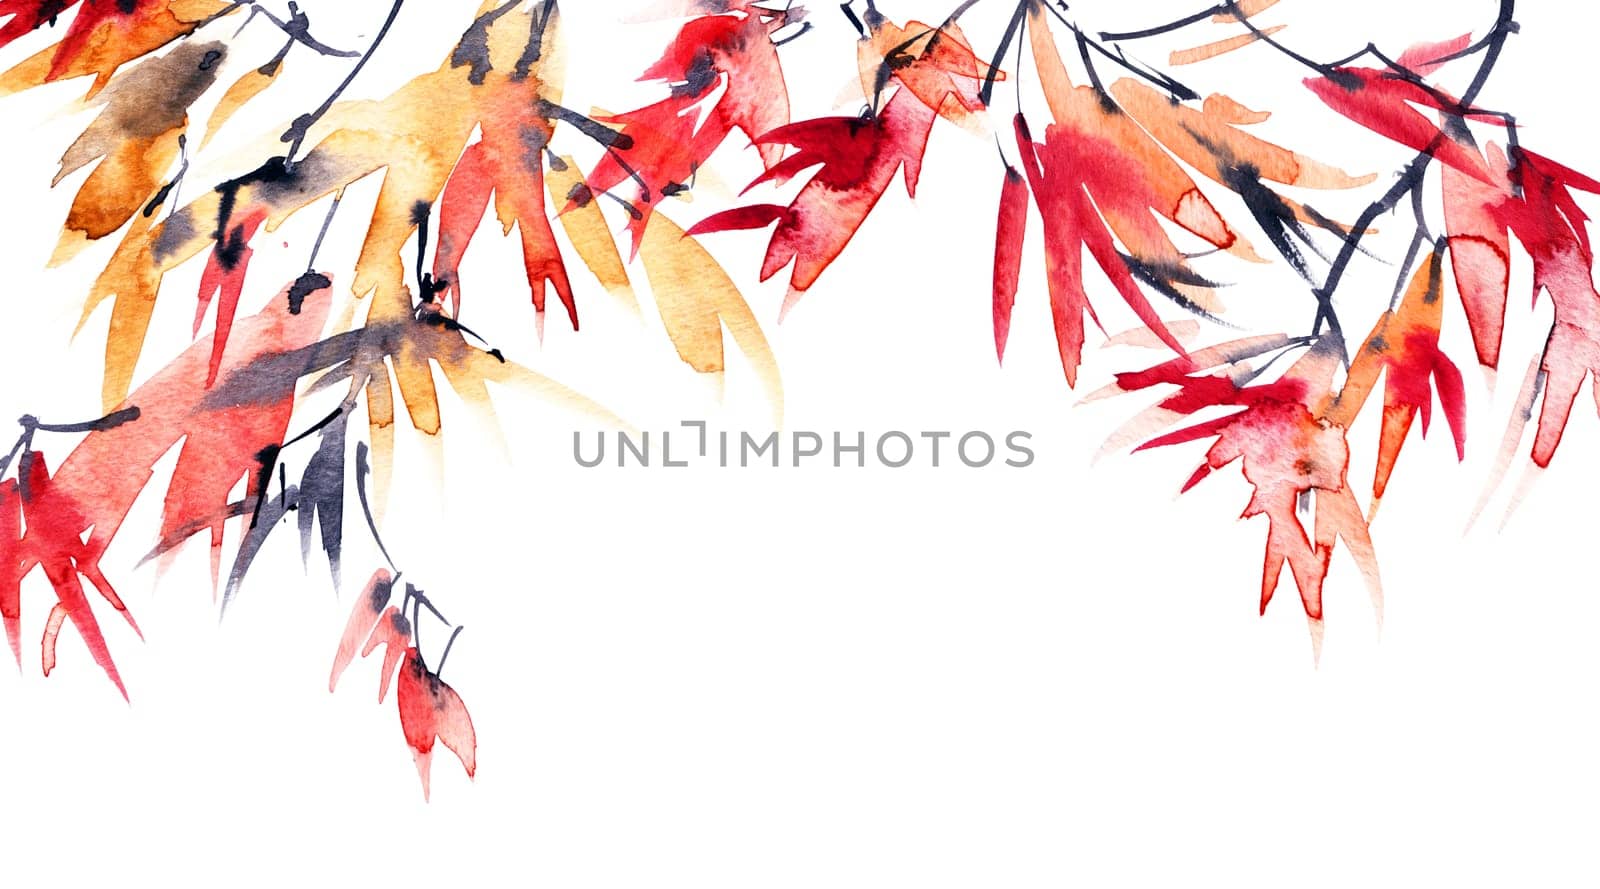 Autumn tree with orange and red leaves on white background - horizontal background design. Hand drawn artistic painting in sumi-e style, Japanese painting, Chinese painting.